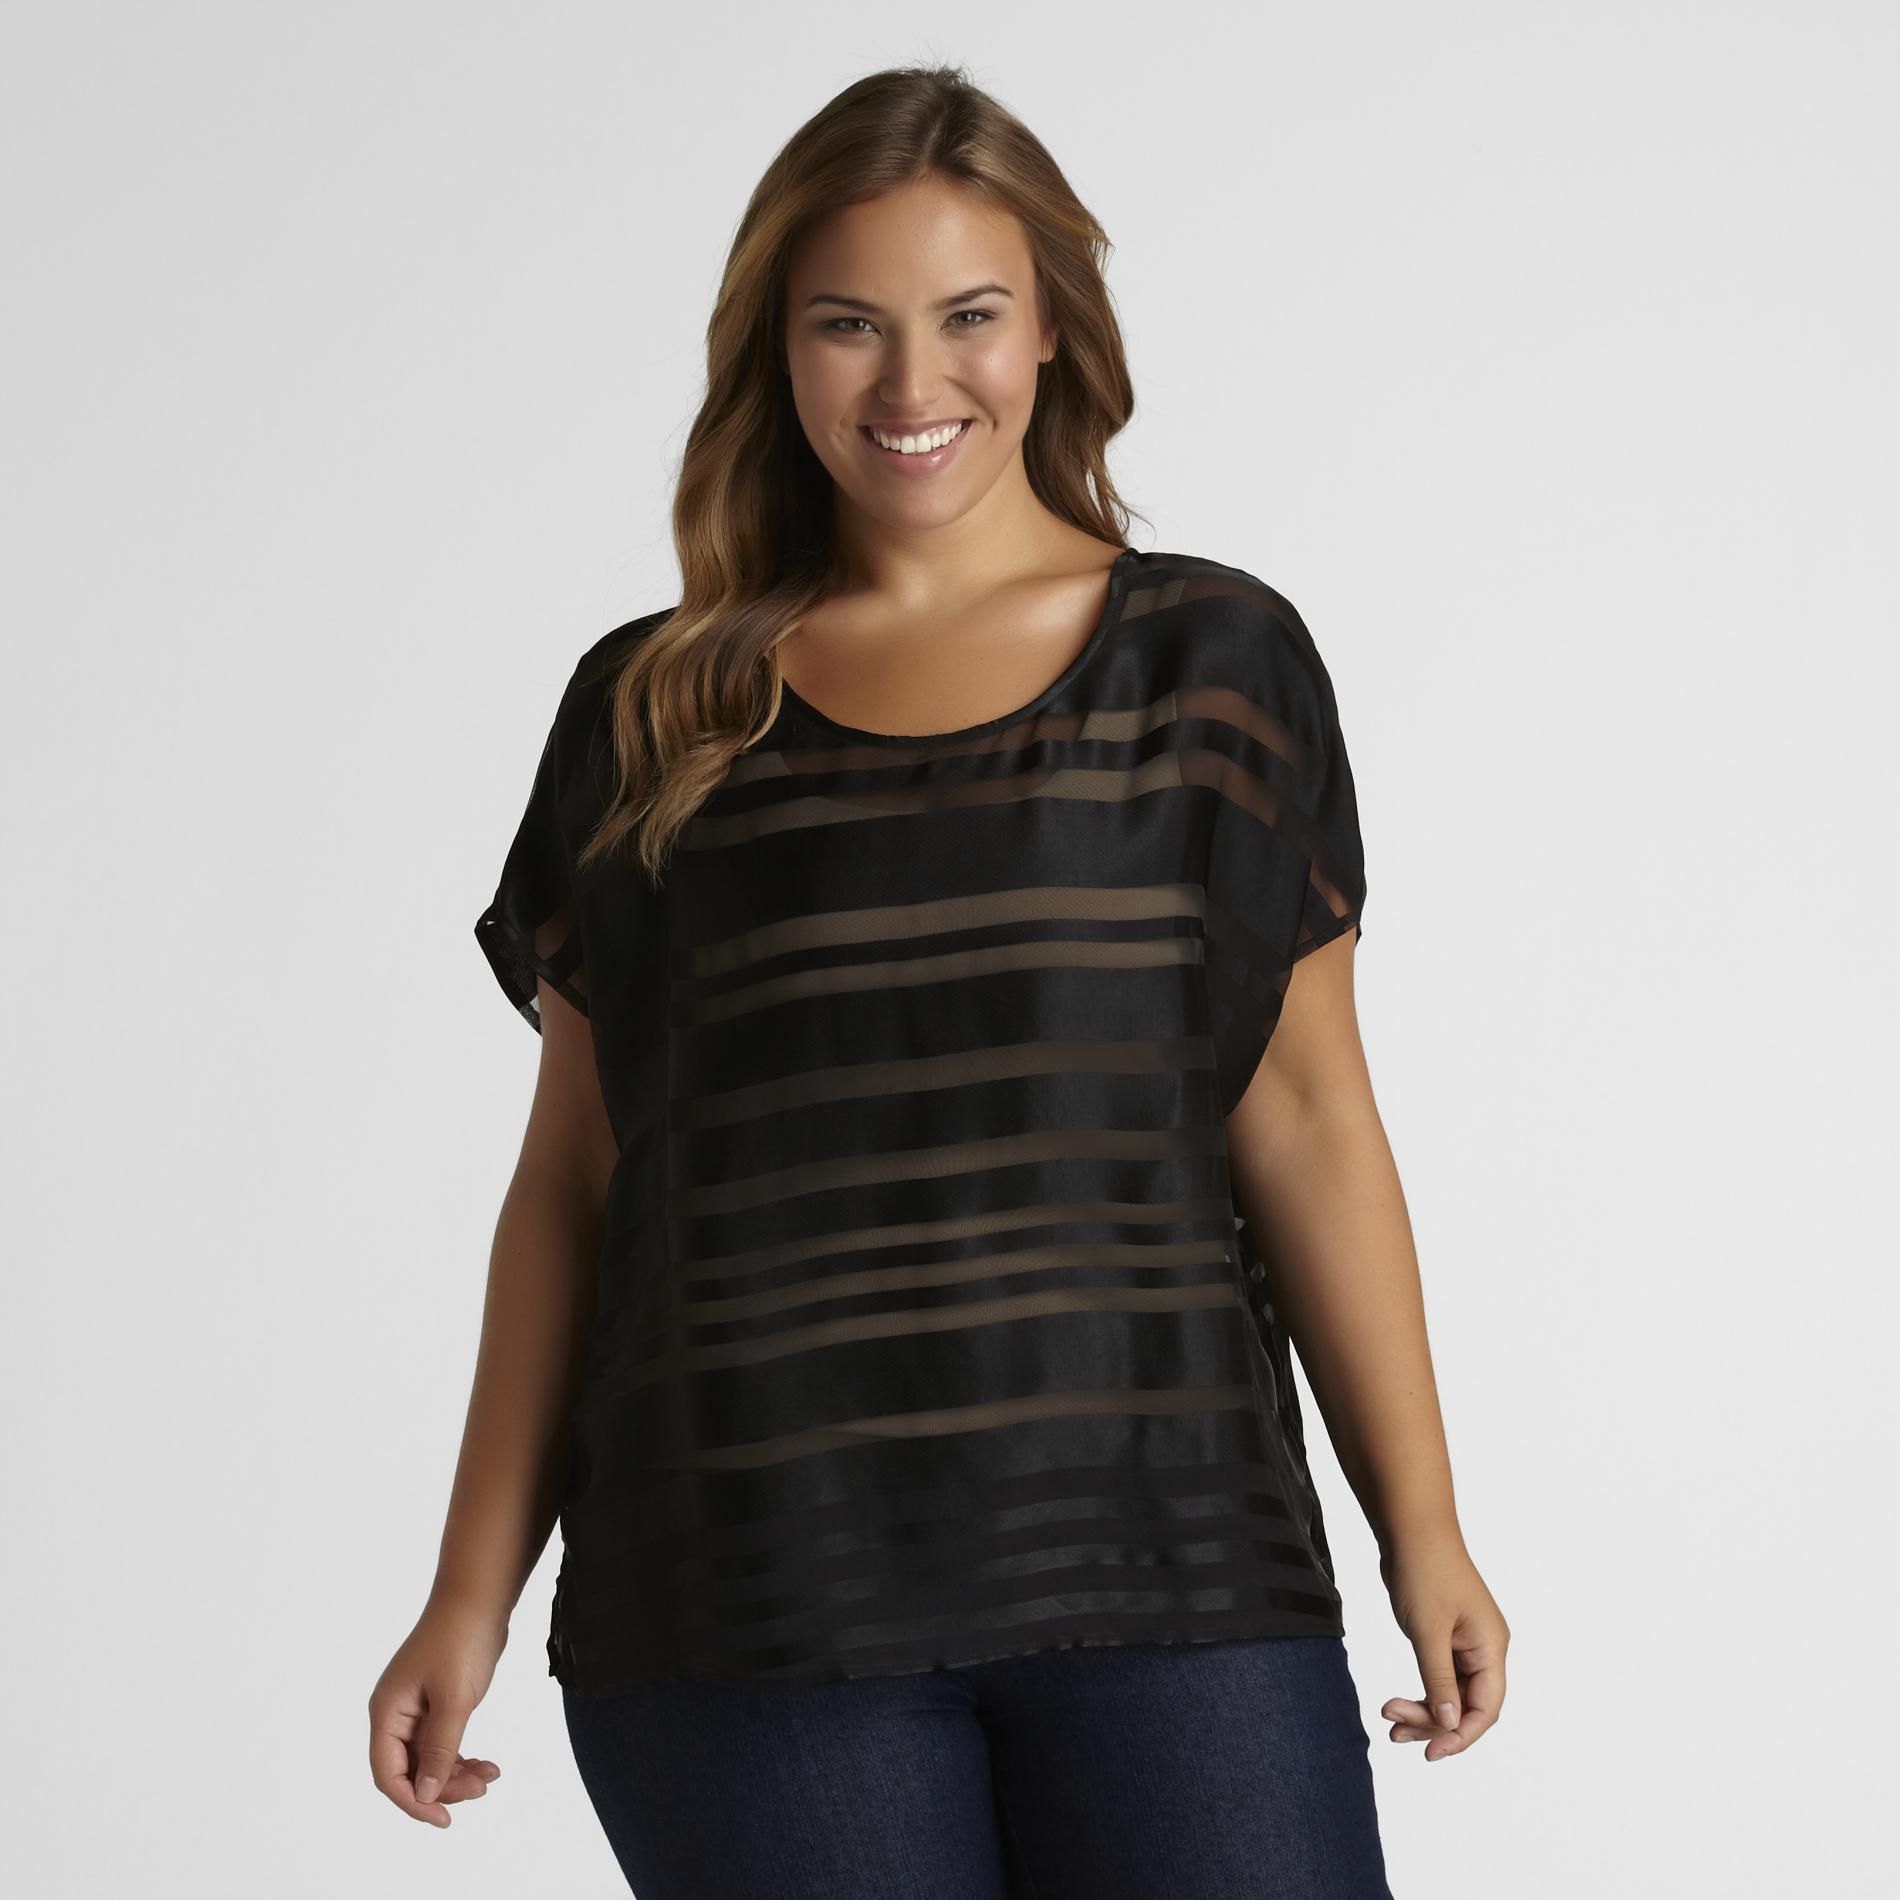 Love Your Style, Love Your Size Women's Plus Burnout Striped Top